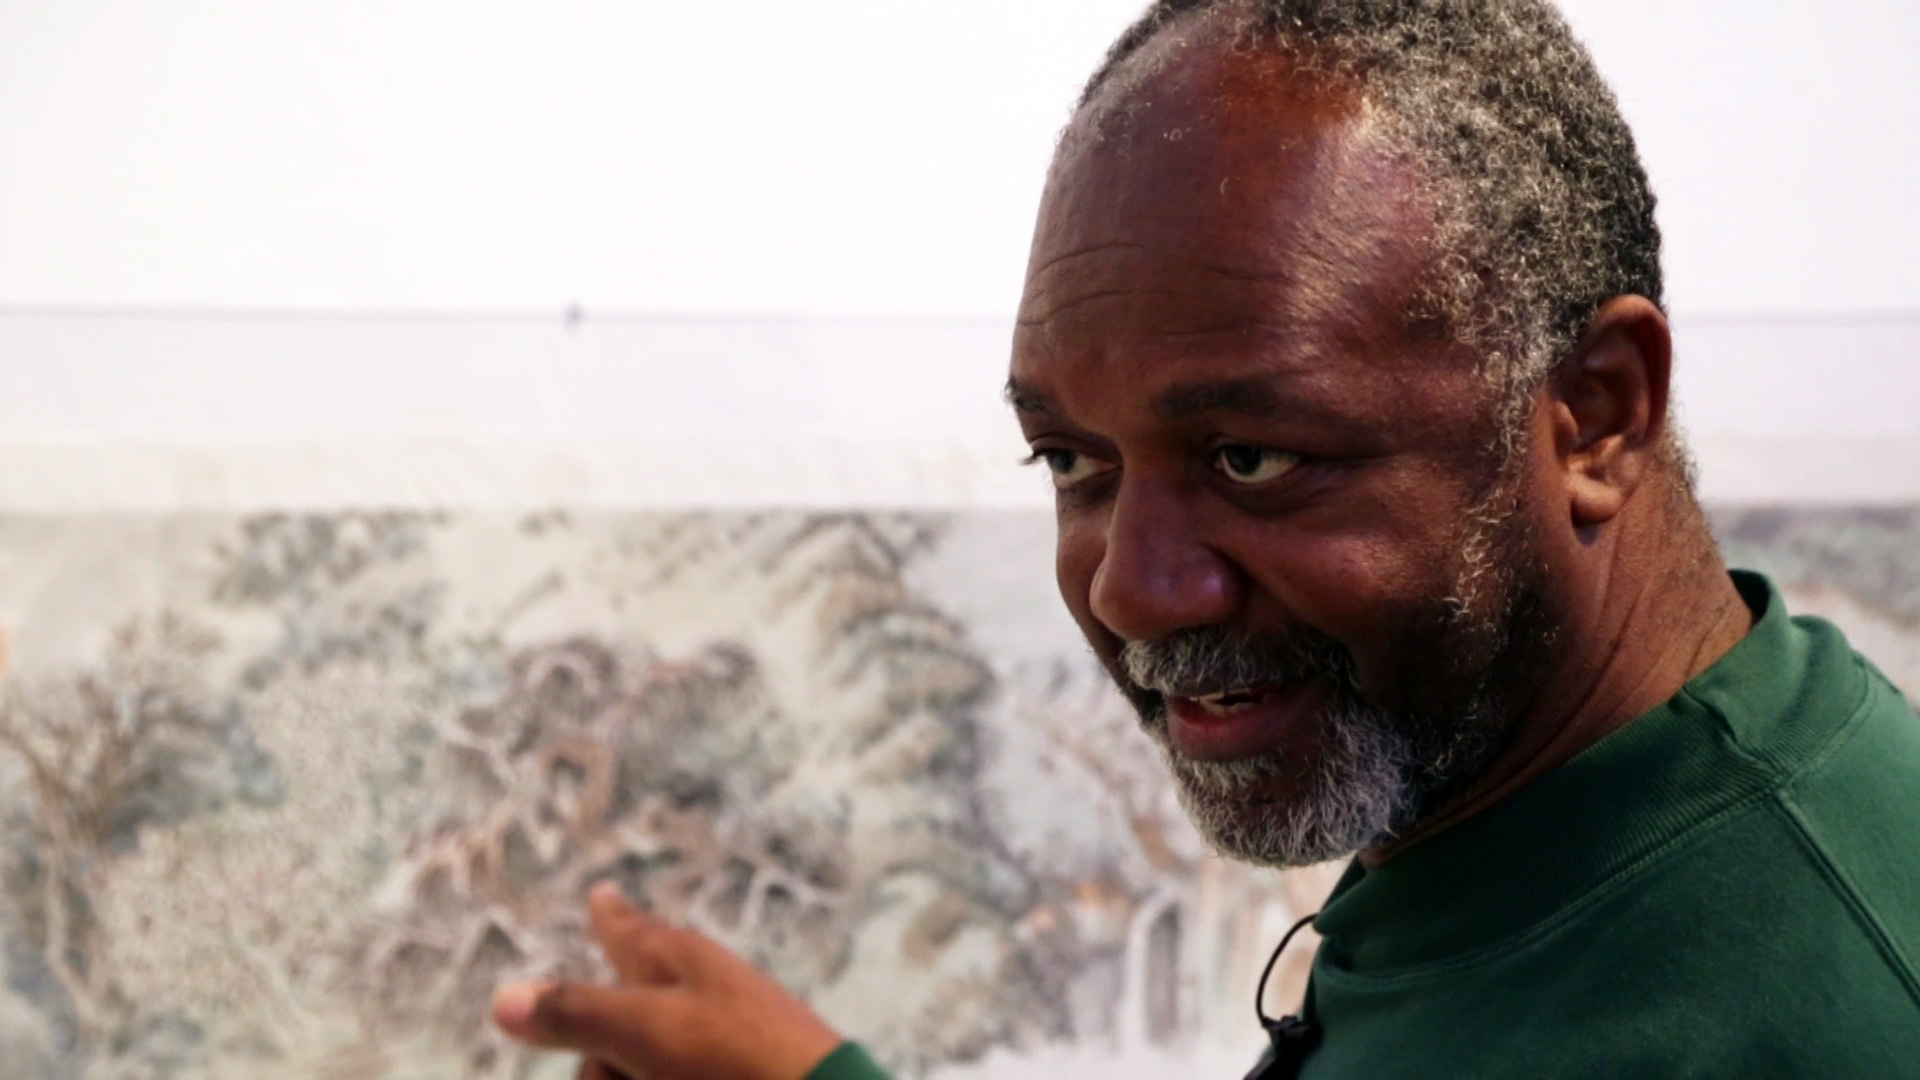 Kerry James Marshall discussing the work of Yun-Fei Ji at the Prospect.3 biennial in New Orleans, Louisiana. Production still from the series ART21 Artist to Artist. © ART21, Inc. 2014. Cinematography: Ian Forster.